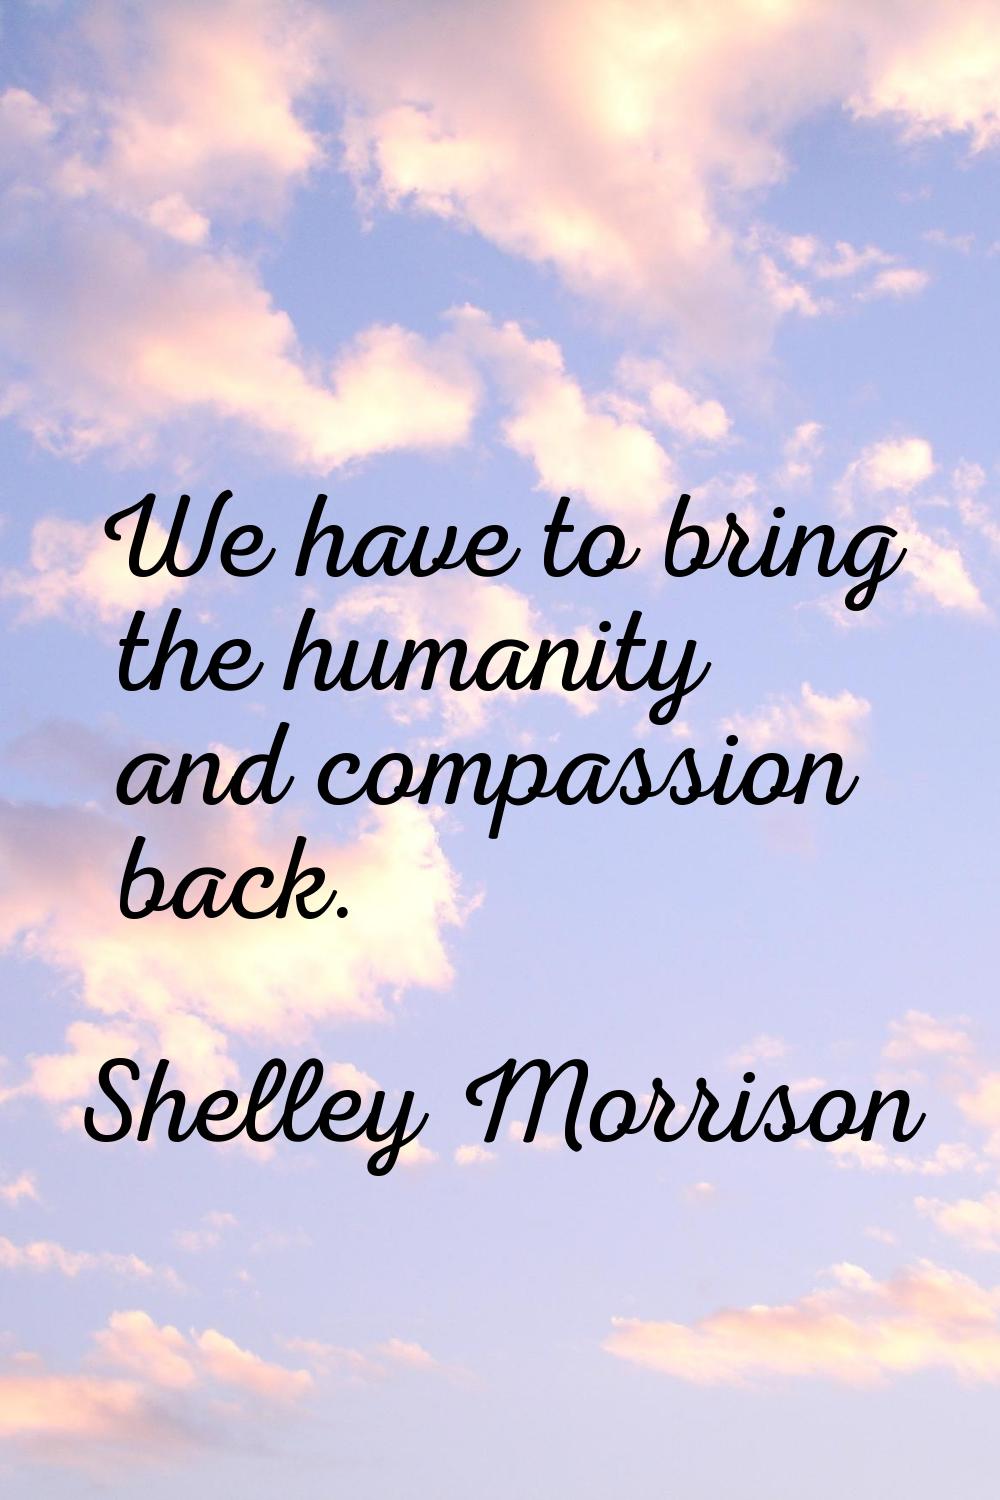 We have to bring the humanity and compassion back.